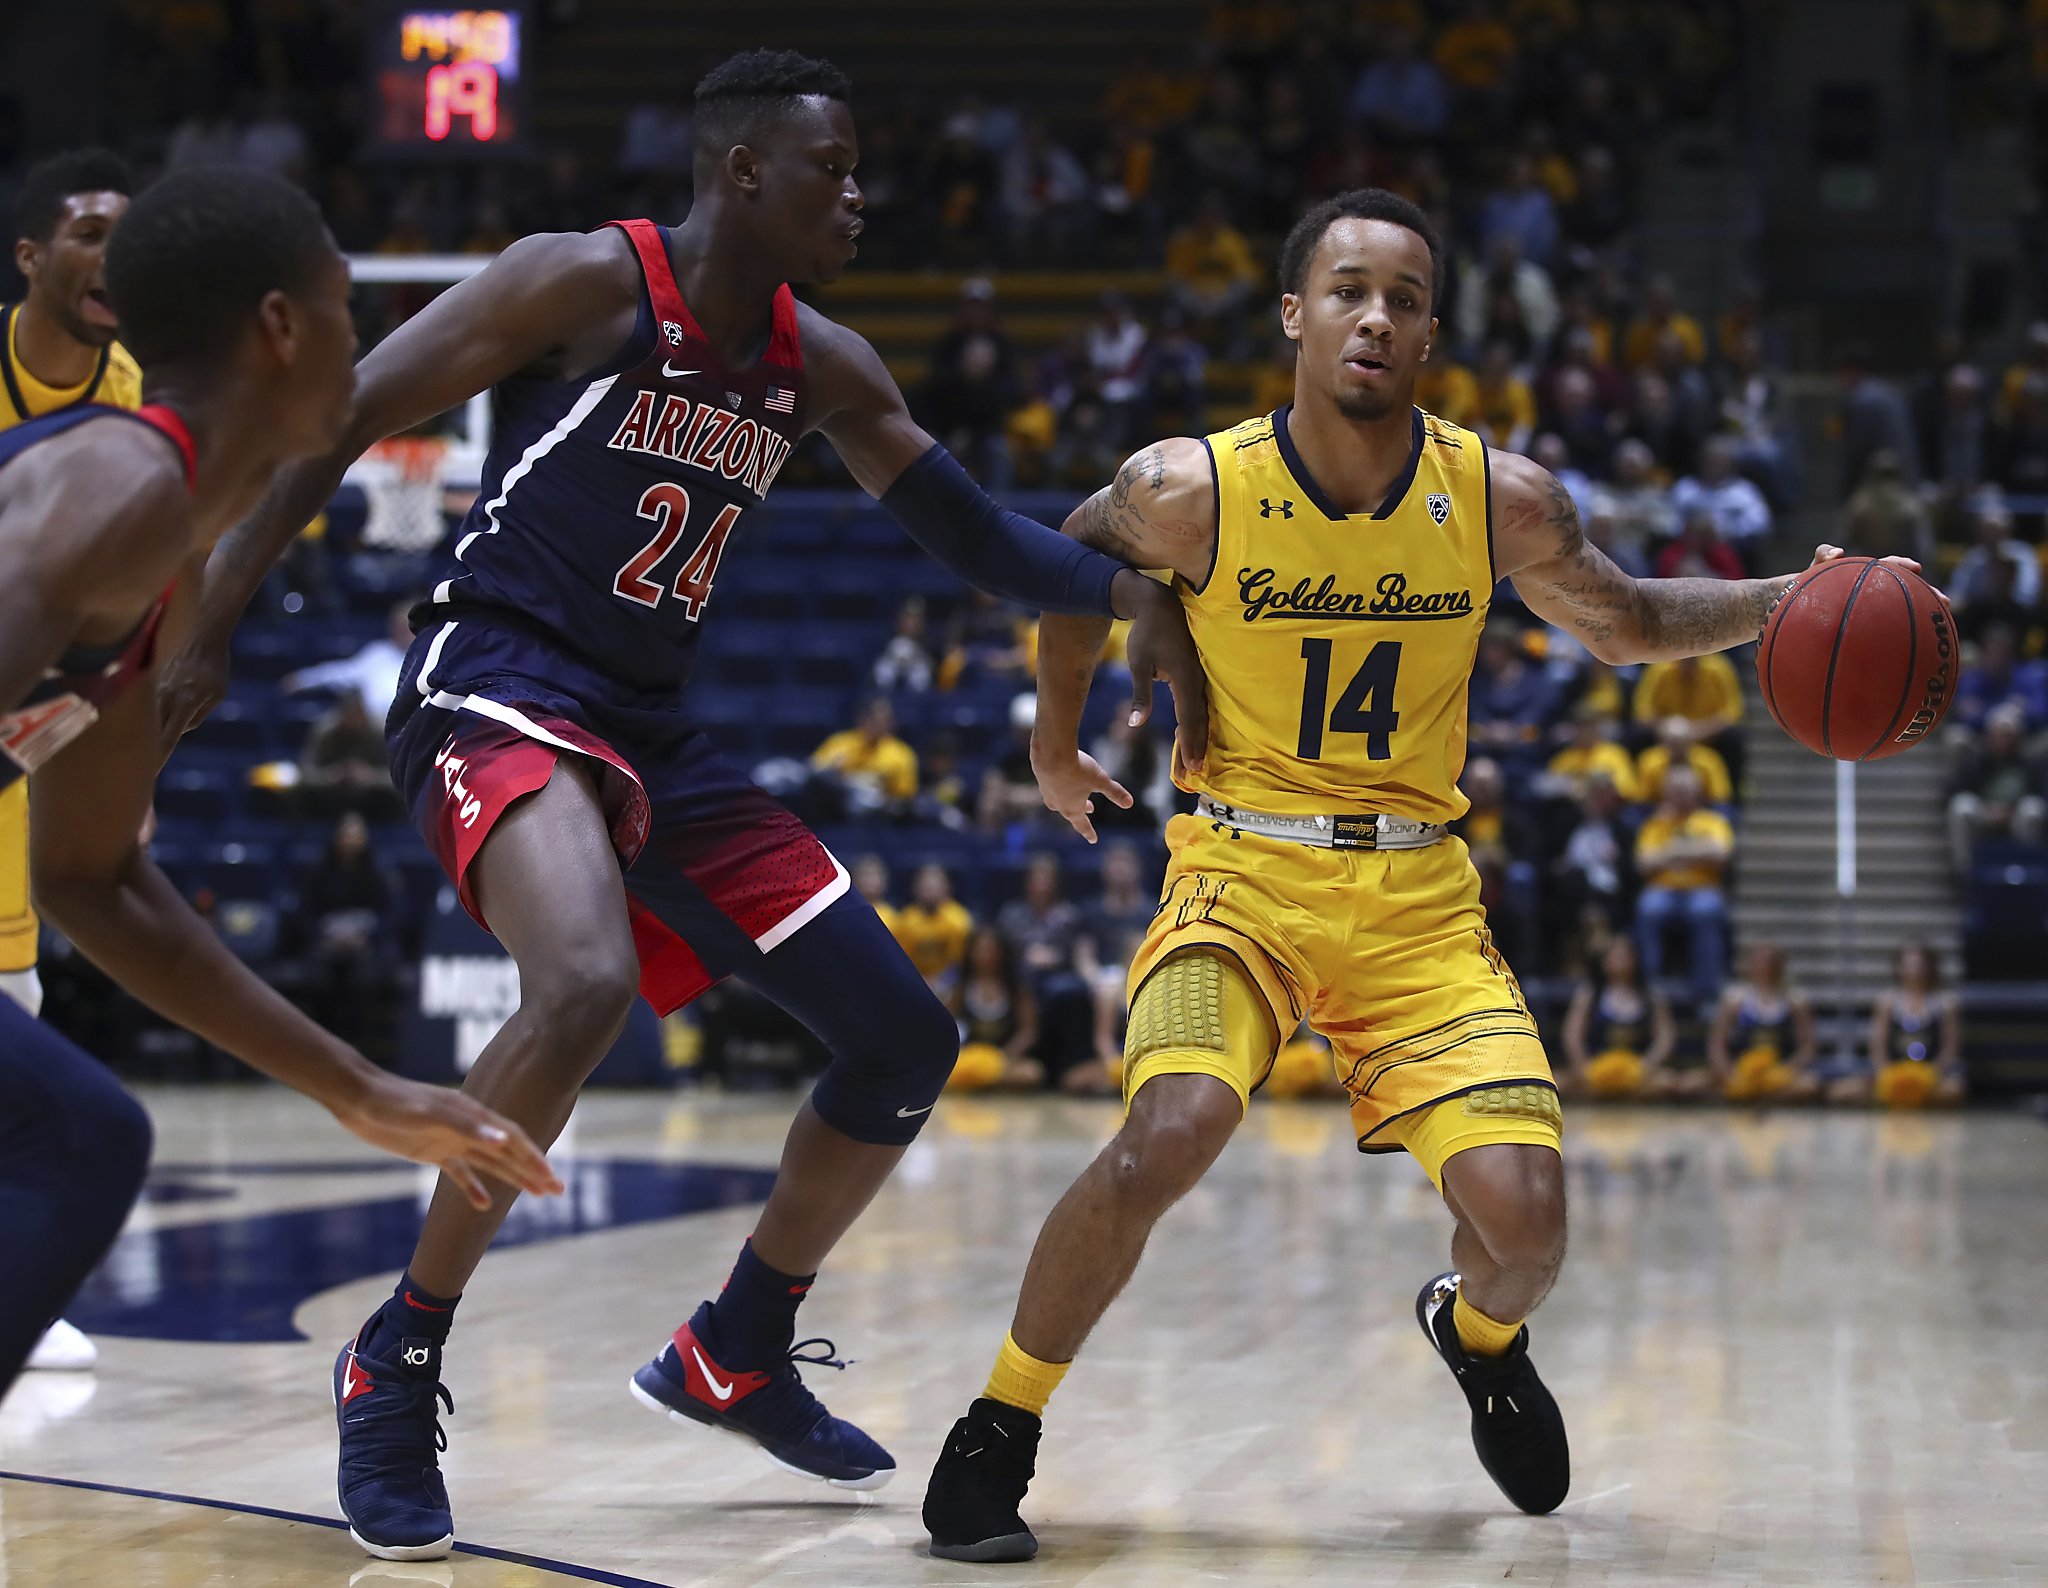 Cal men get blown out by Arizona in fifth straight loss